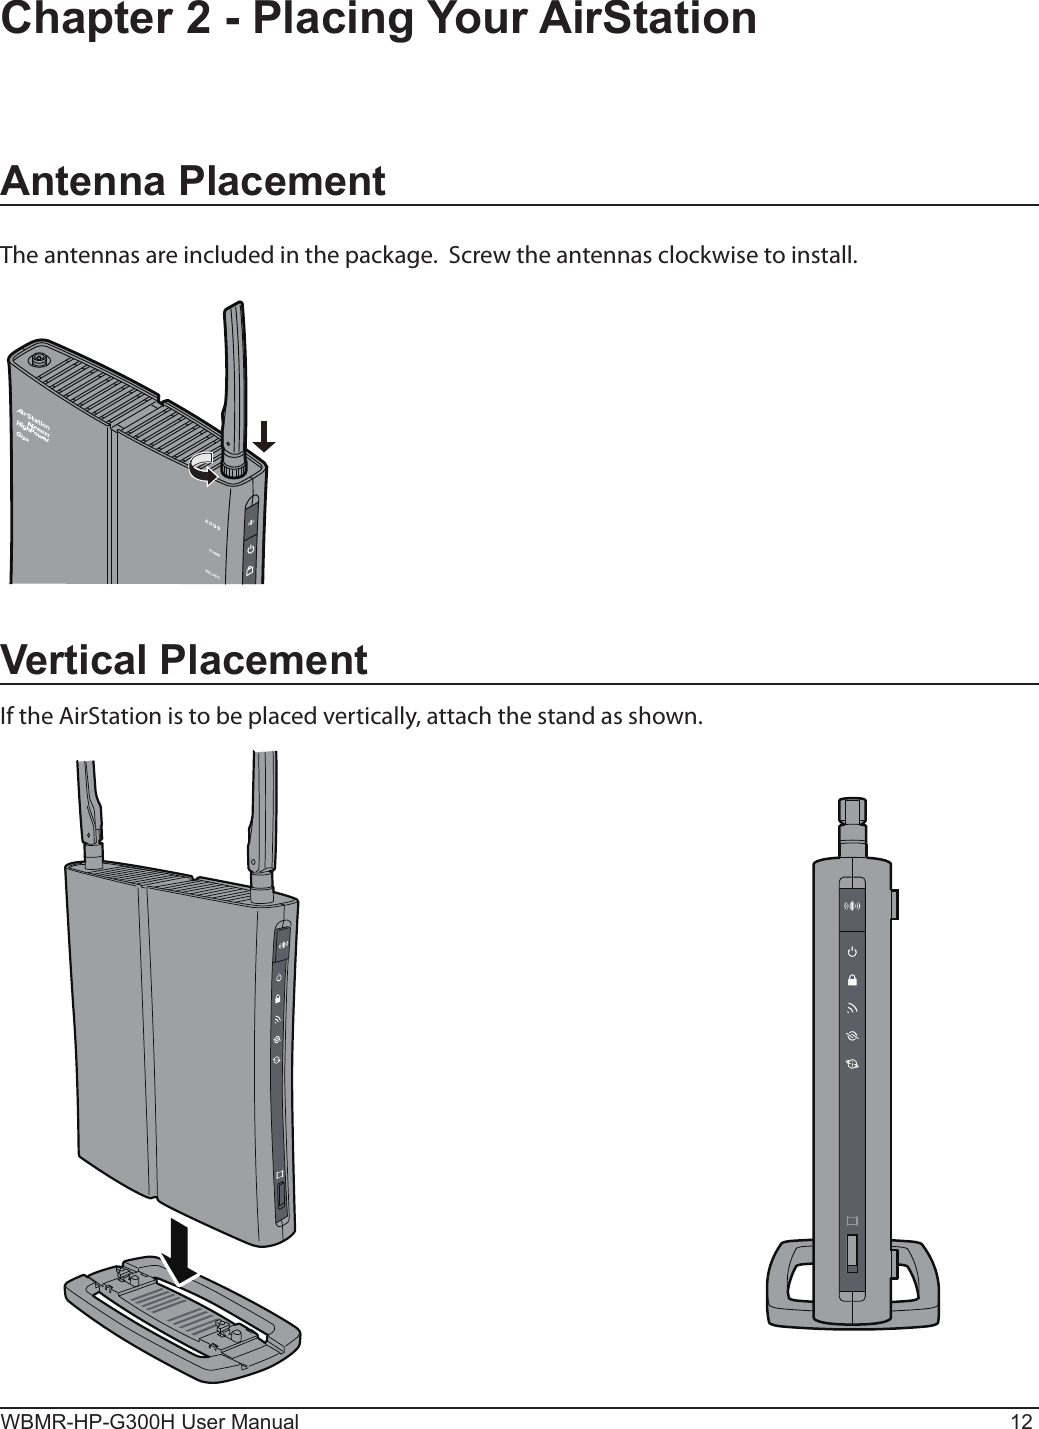 WBMR-HP-G300H User Manual 12Chapter 2 - Placing Your AirStationVertical PlacementIf the AirStation is to be placed vertically, attach the stand as shown.Antenna PlacementThe antennas are included in the package.  Screw the antennas clockwise to install.